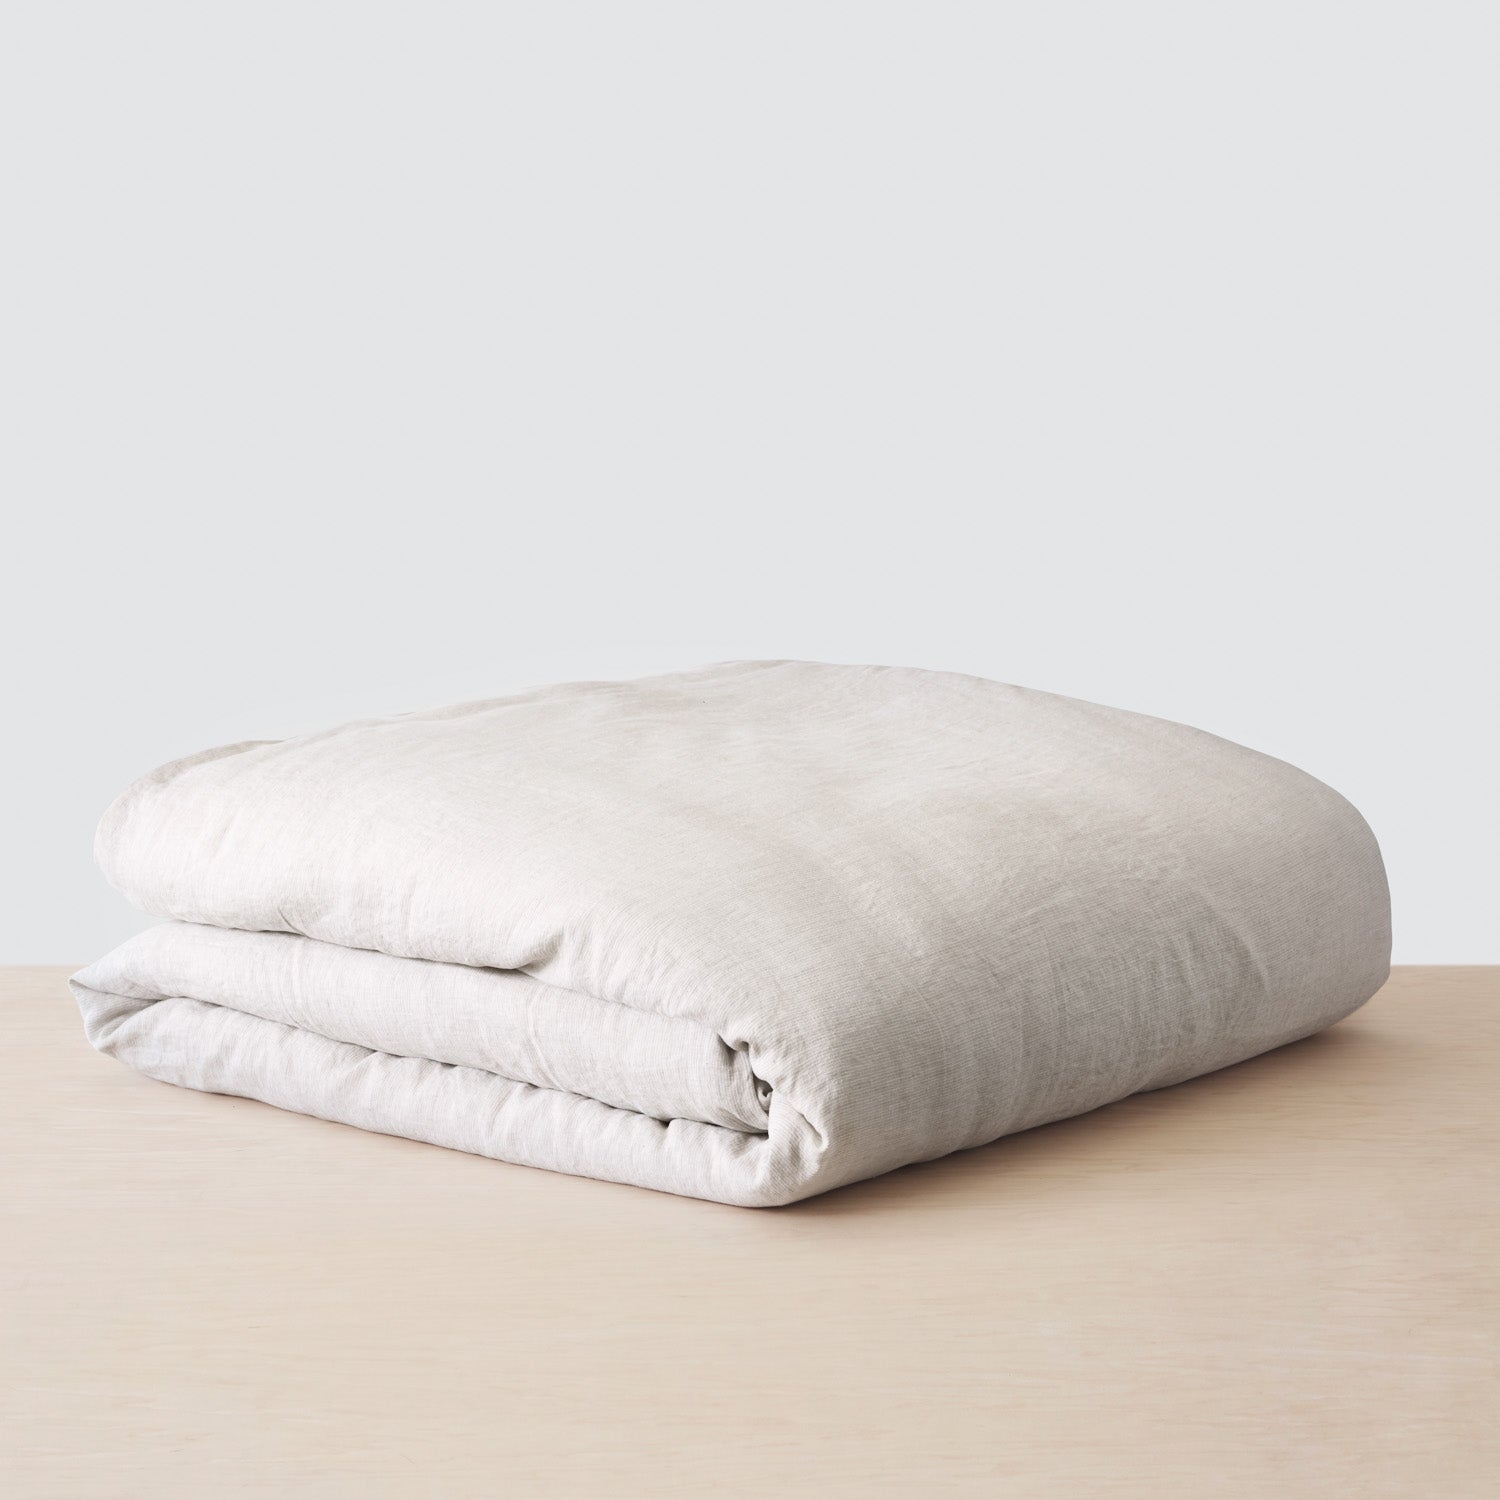 The Citizenry Stonewashed Linen Duvet Cover | Full/Queen | Duvet Only | Indigo Chambray - Image 9